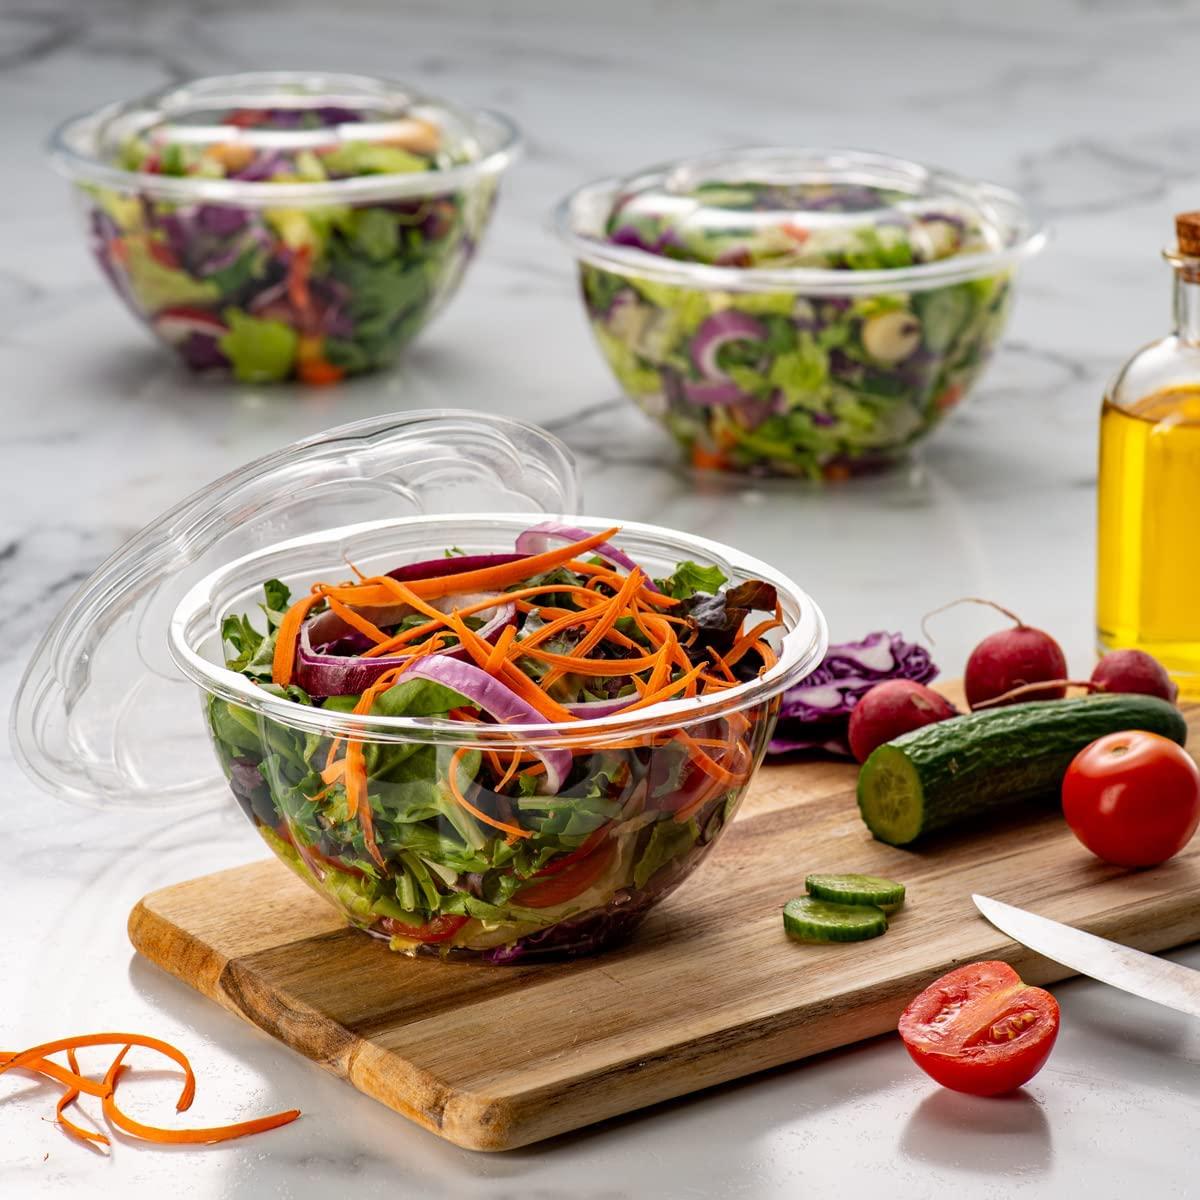 32 oz. Salad Bowl Container With Lid, Clear Plastic Bowls & Lids for  Take-out